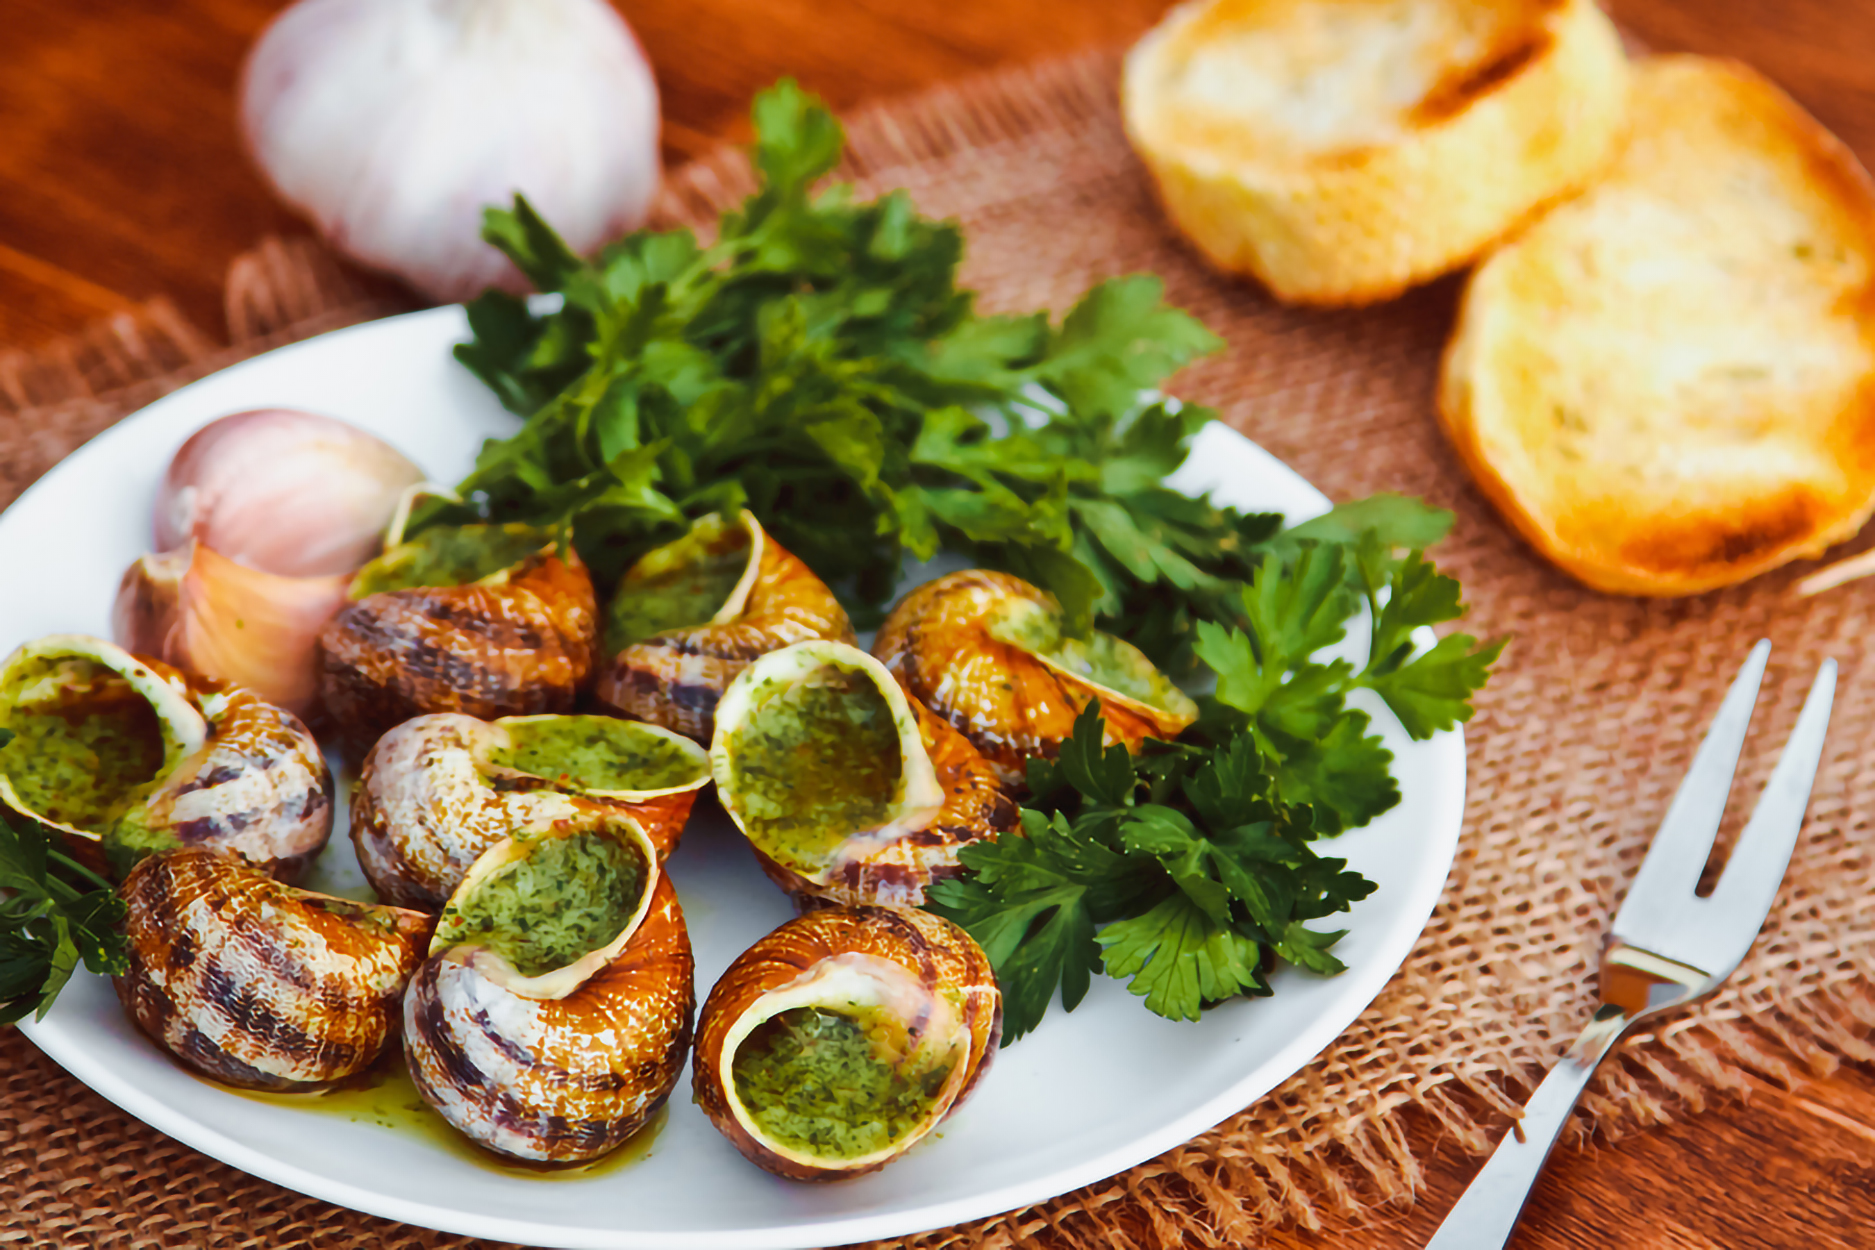 🍴 If You Answer “Yes” At Least 15 Times in This Food Quiz, You’re Definitely Fancy Escargots De Bourgogne   Snails With Herbs Butter, Gourmet Dish